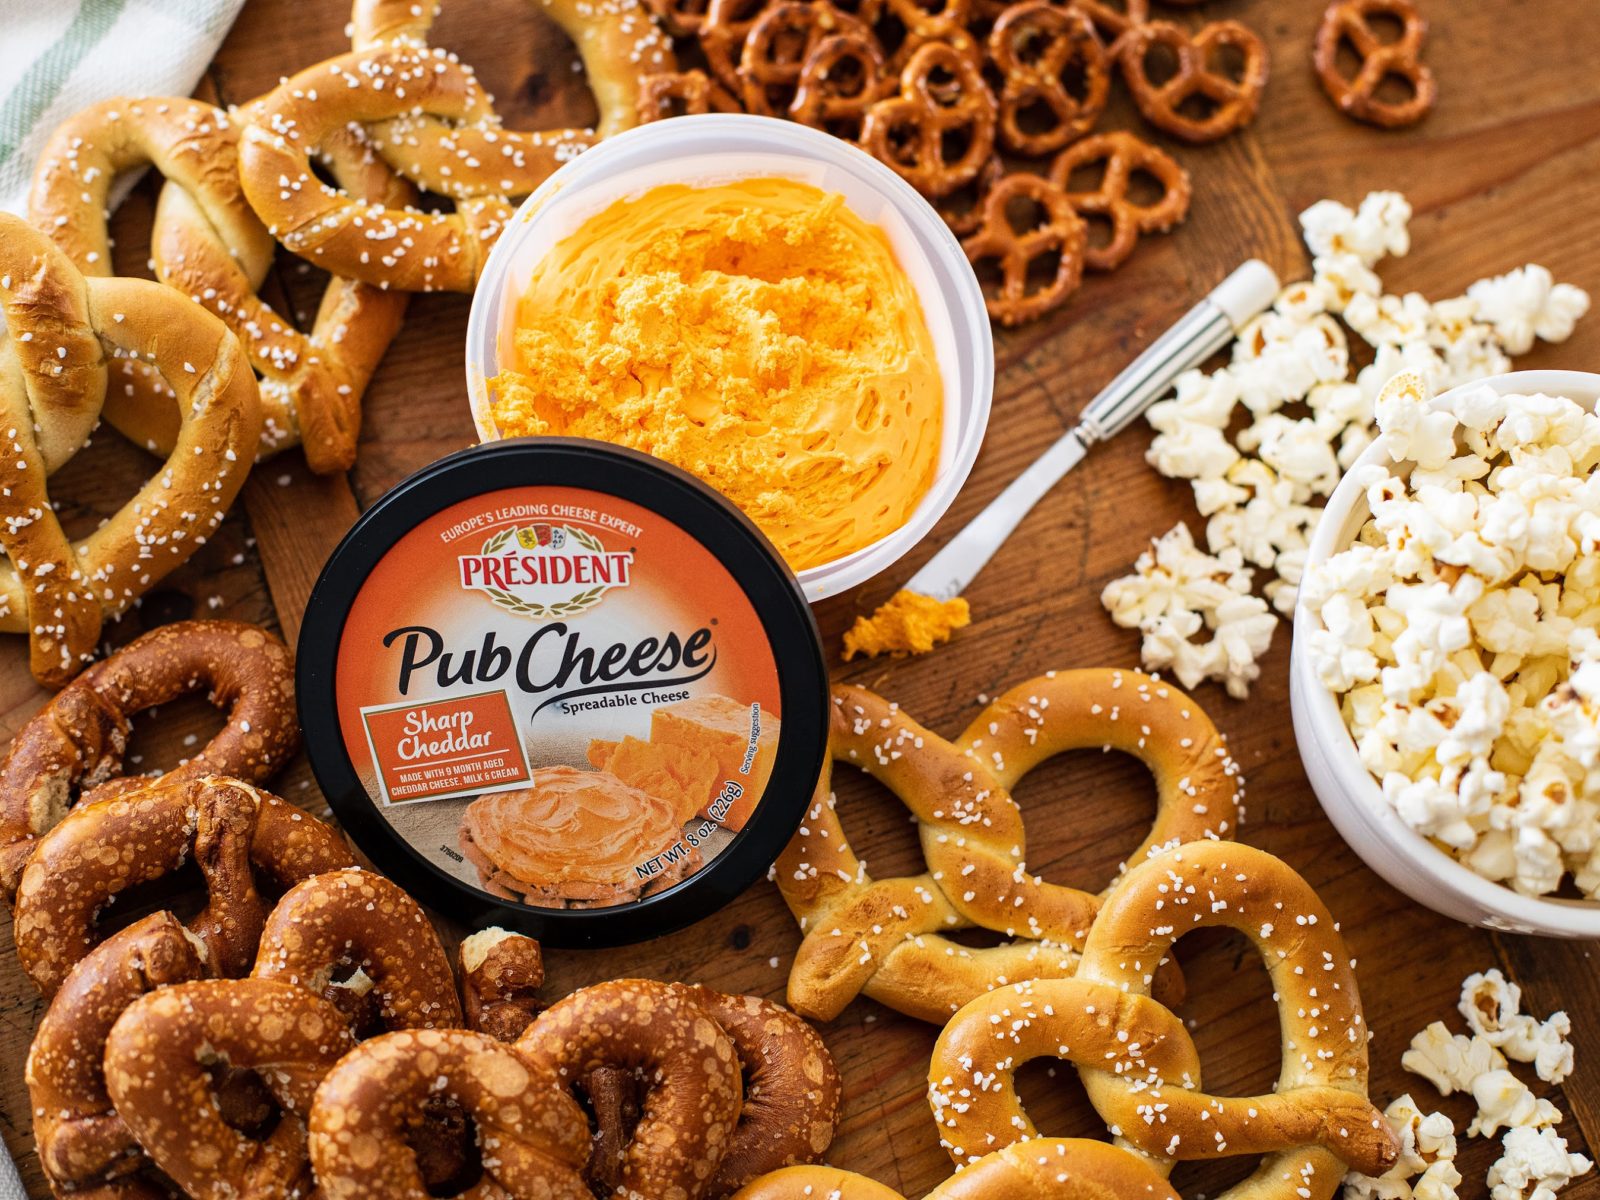 Game Day Snacks Made Simple Thanks To PUB CHEESE® Spreadable Cheese on I Heart Publix